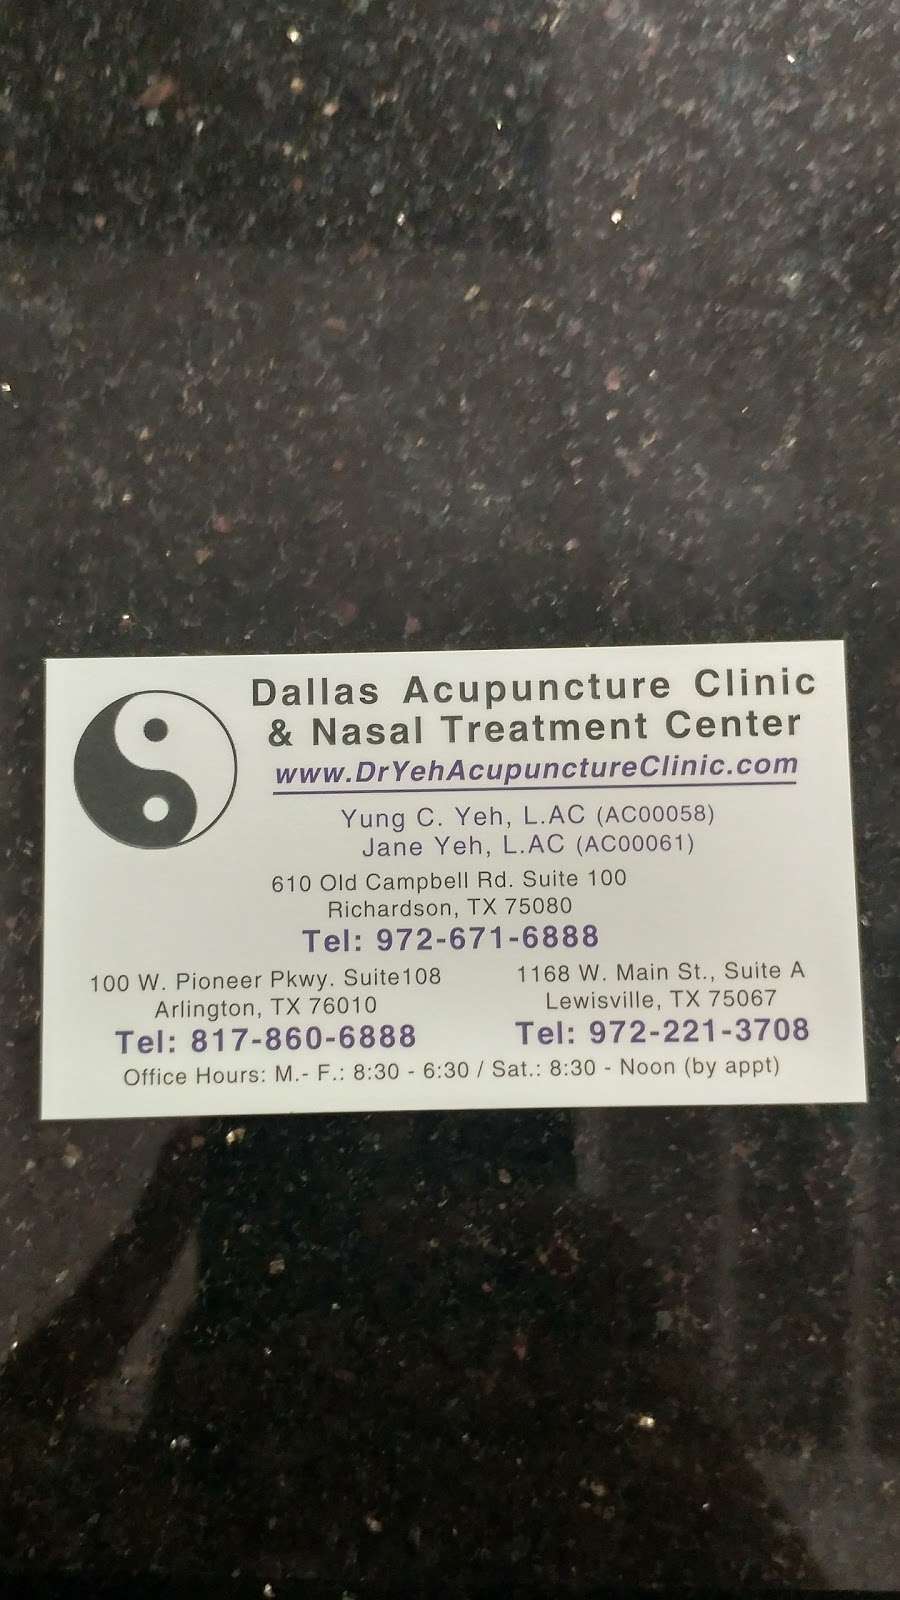 Dallas Acupuncture Clinic | 610 Old Campbell Rd #100, Richardson, TX 75080 | Phone: (972) 671-6888